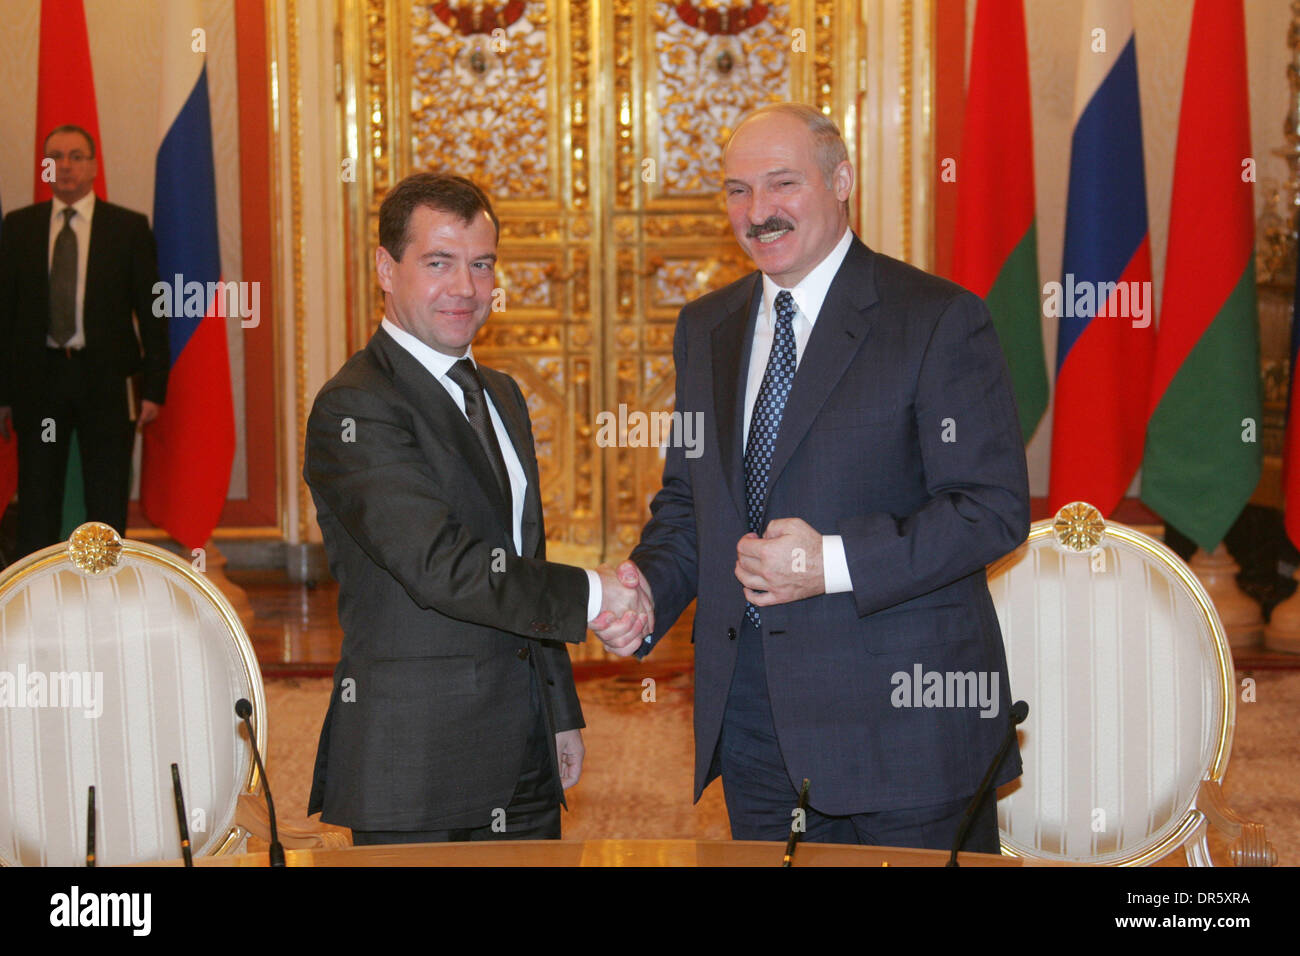 Feb 03, 2009 - Moscow, Russia - Russian President DMITRY MEDVEDEV (L) meets President of Belarus ALEXANDER LUKASHENKO in Moscow. Belarus is absolutely sincere in its policy towards Russia, said President of the Republic of Belarus, Chairman of the Supreme State Council of the Belarus-Russia Union State Alexander Lukashenko at his meeting with President Dmitry Medvedev in Moscow. (C Stock Photo